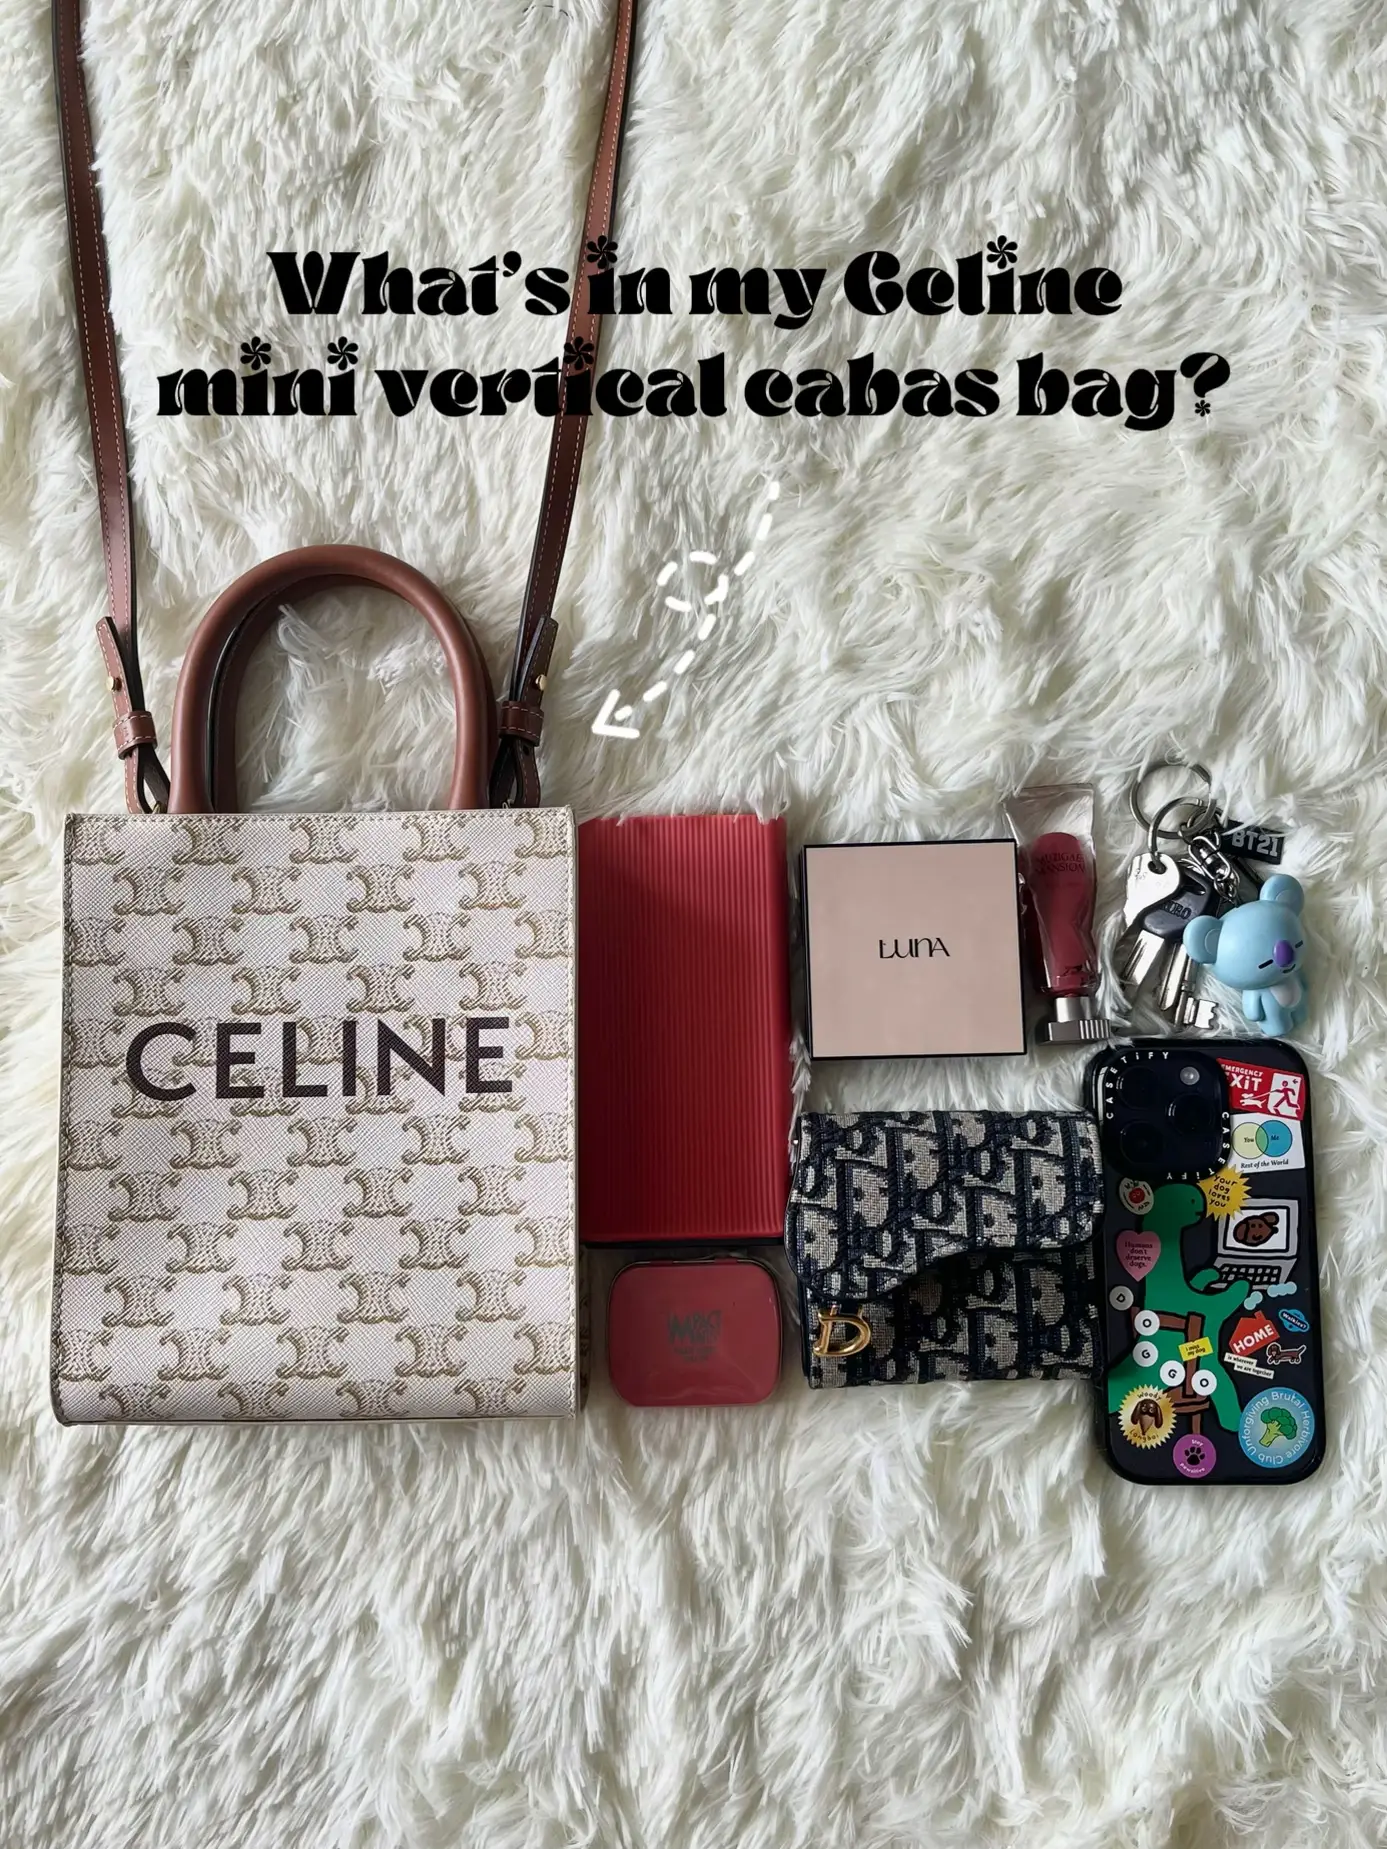 Is the Celine mini vertical cabas bag worth the 💰?